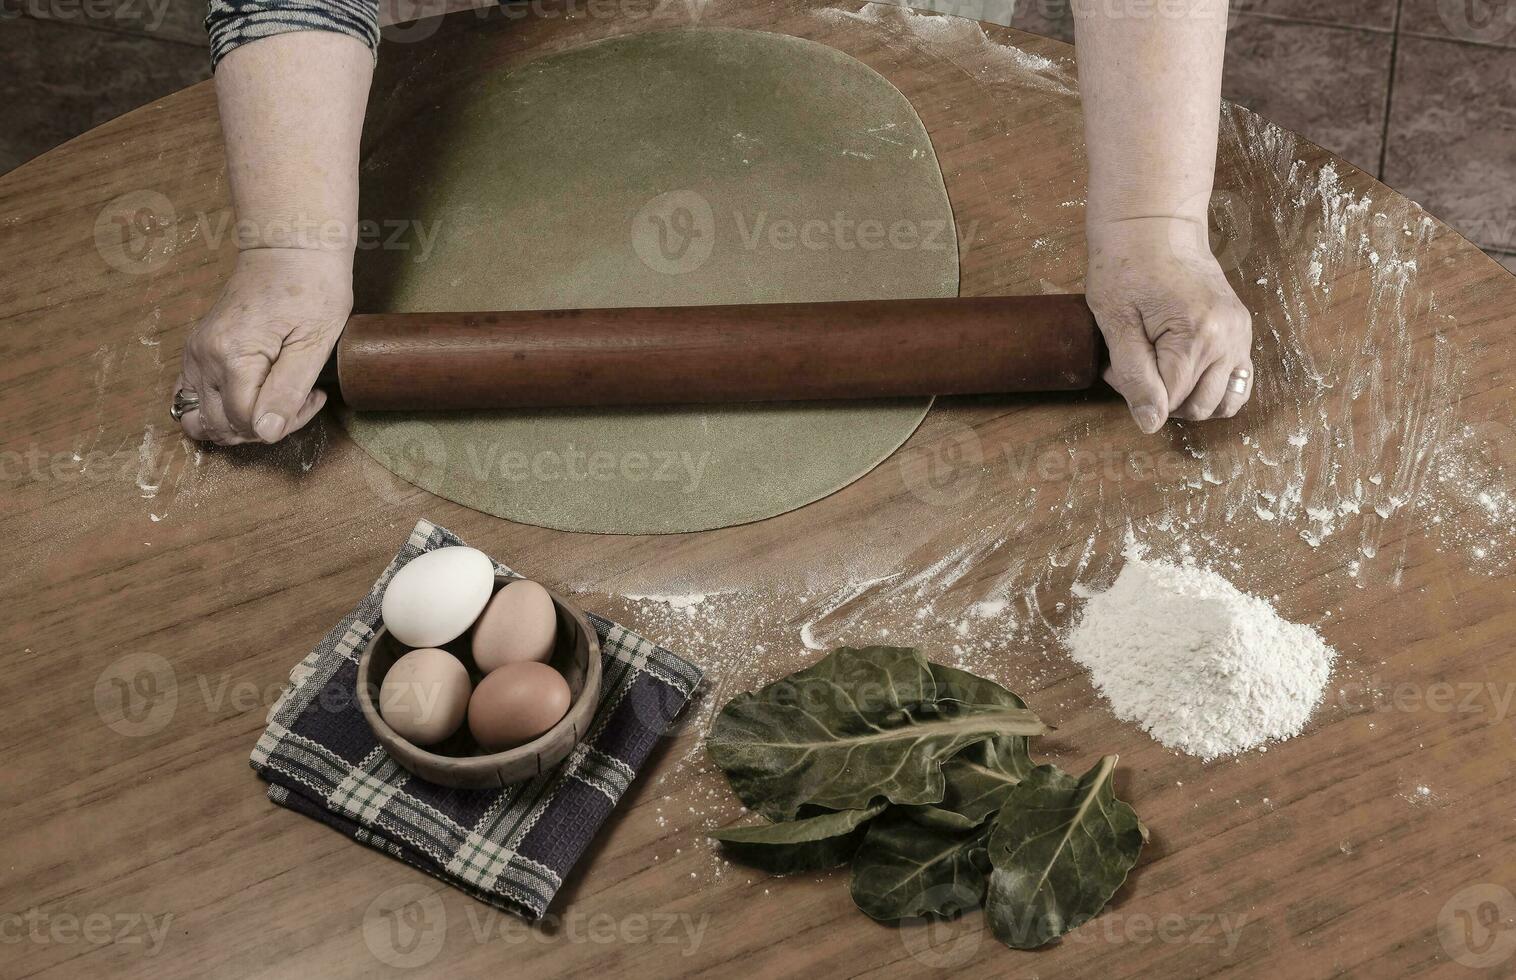 Grandma's hands kneading, dough for green noodles. photo